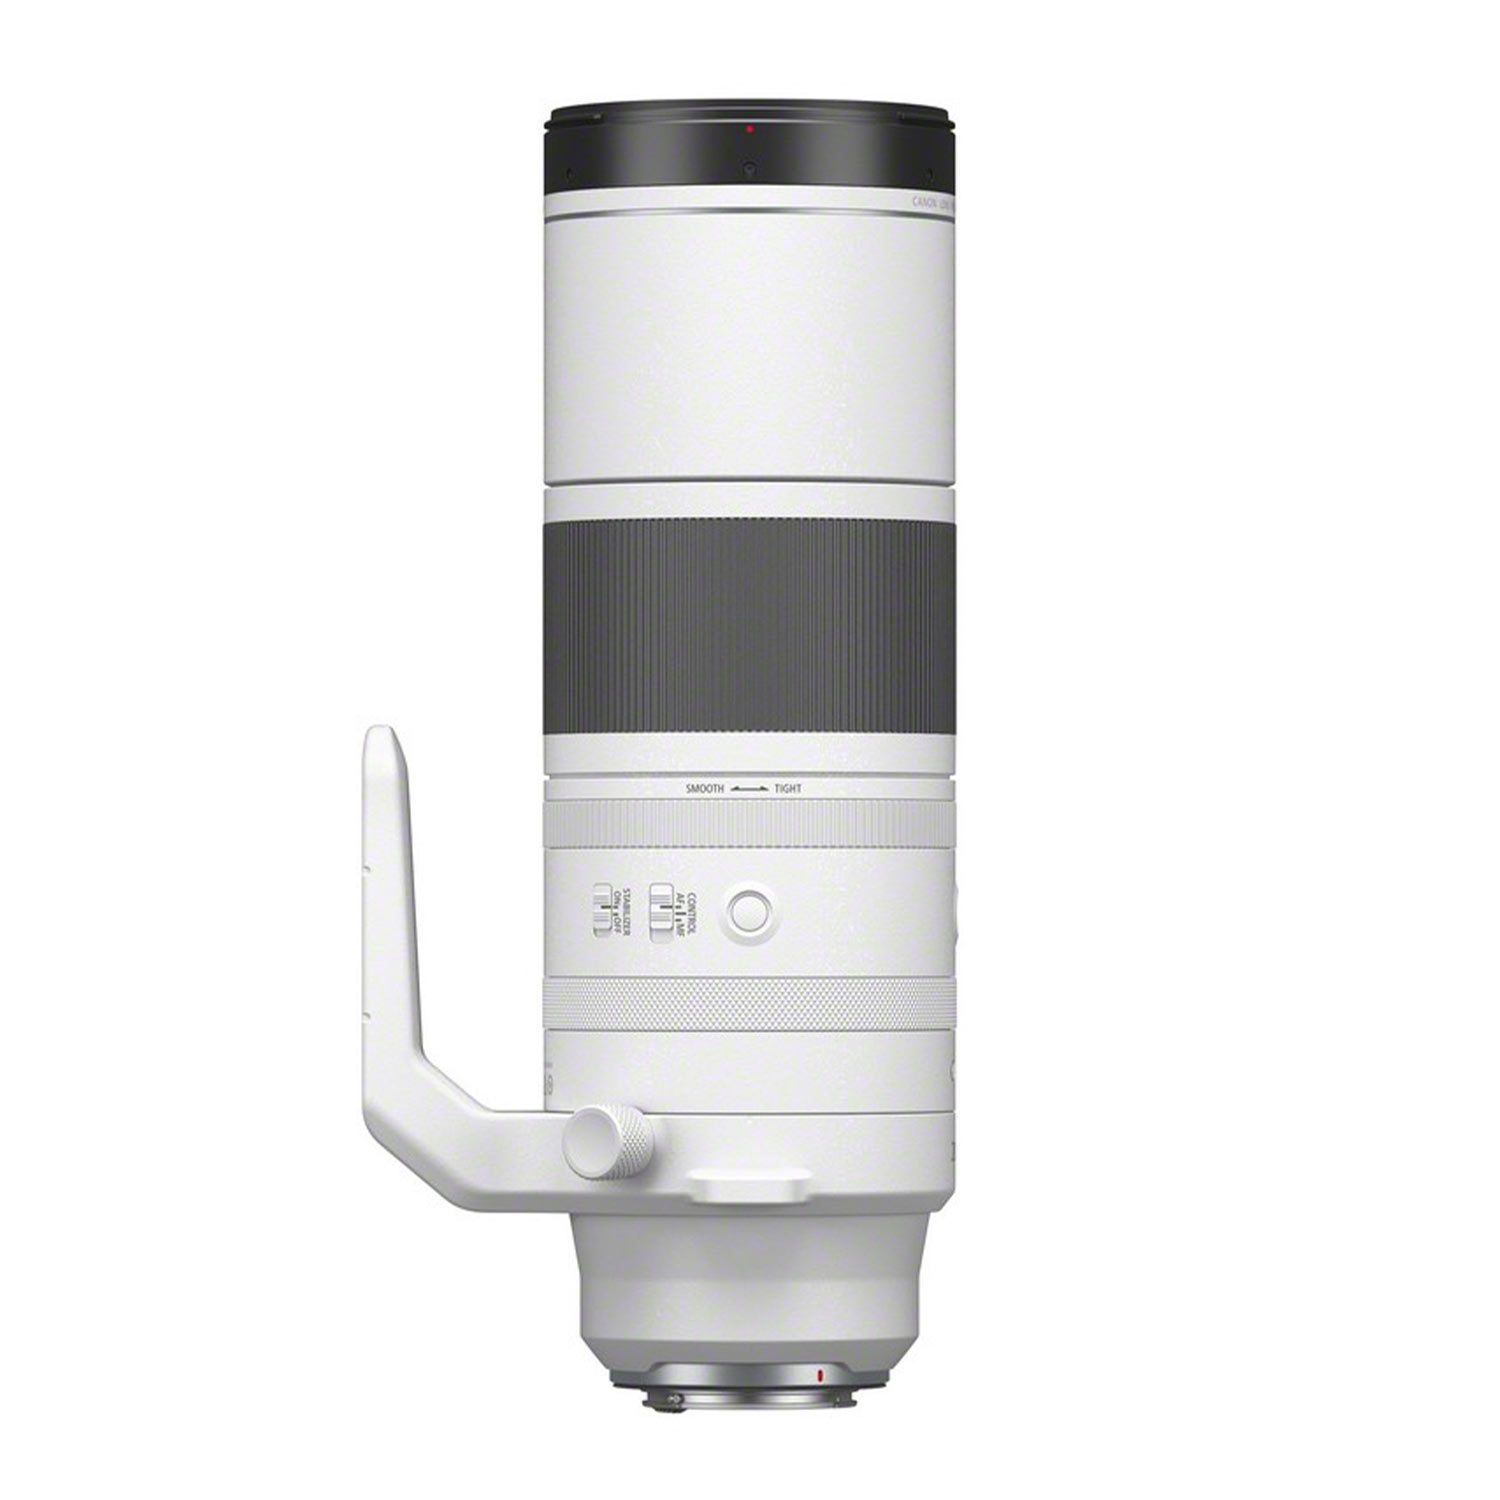 Canon RF 200-800mm 1:6,3-9 IS USM